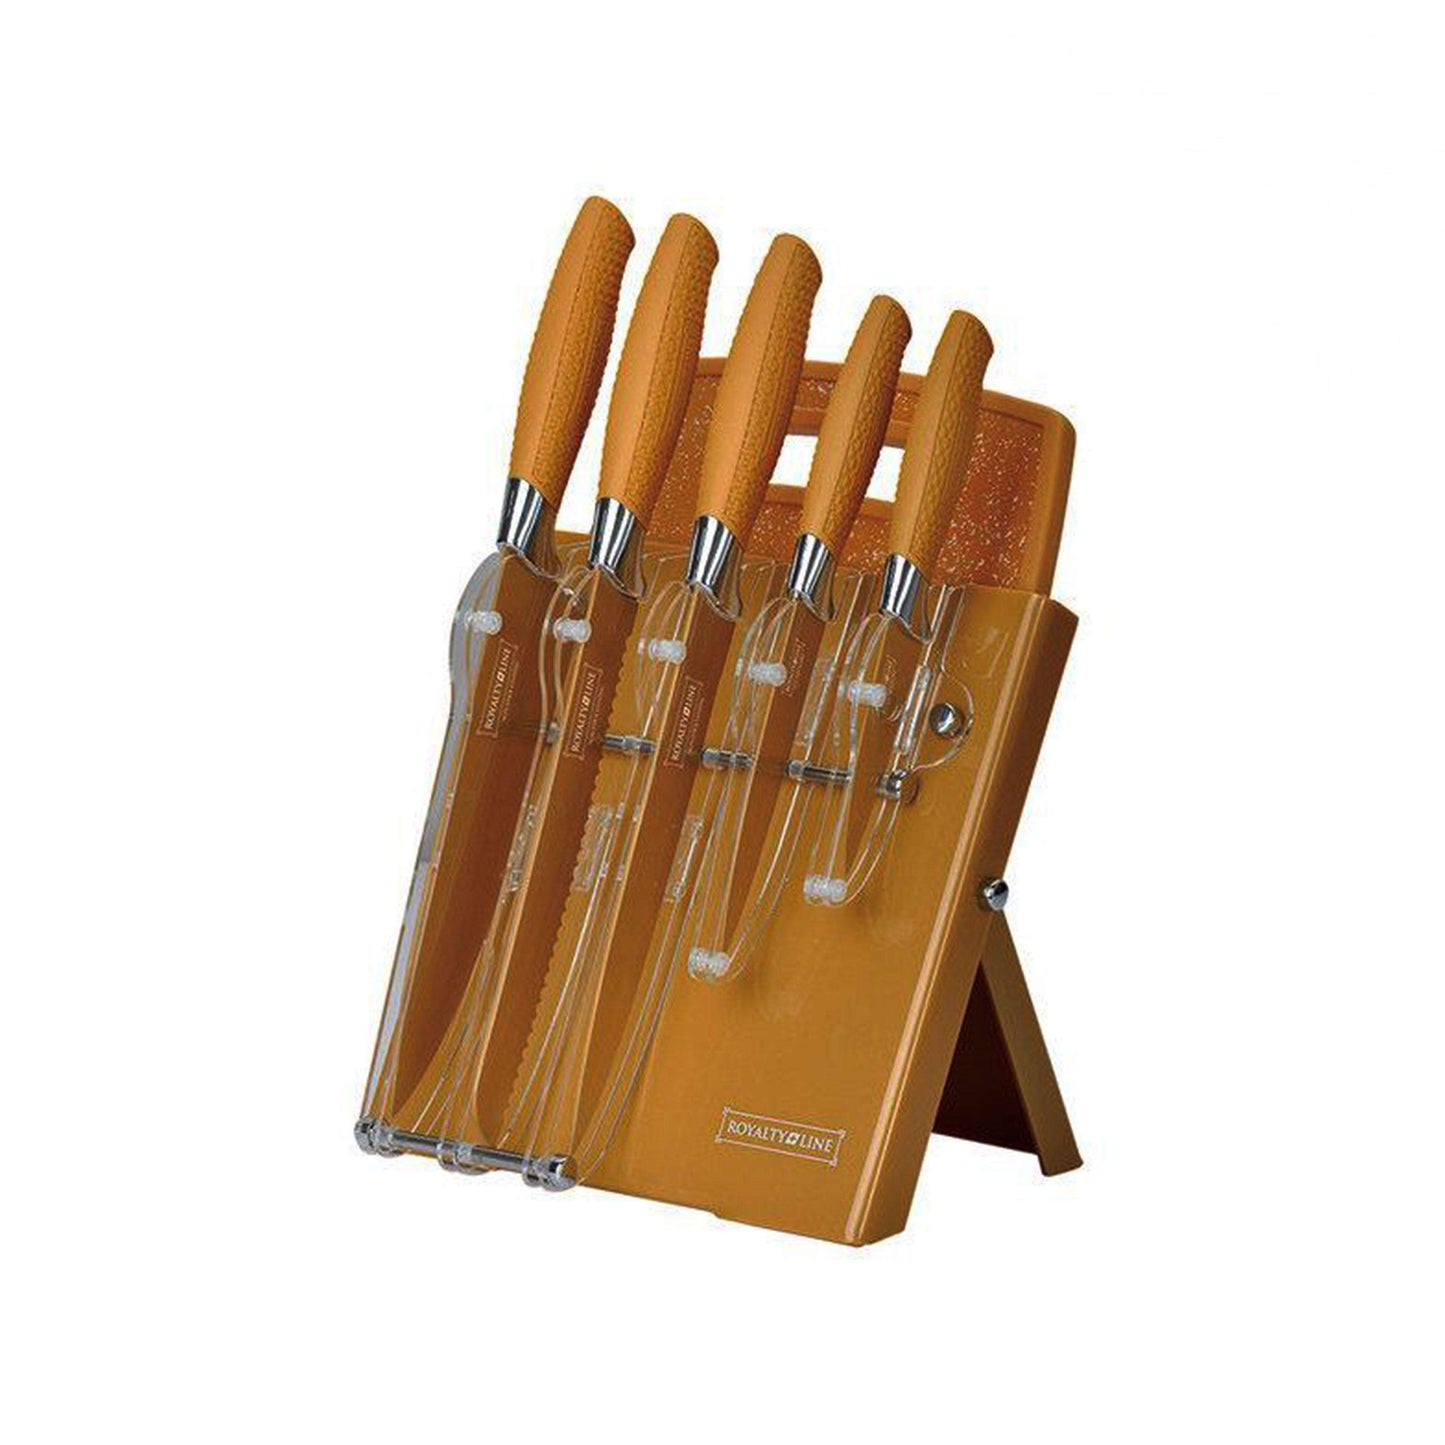 Royalty Line Set of knives 7 pcs with Support Base-Royal Brands Co-